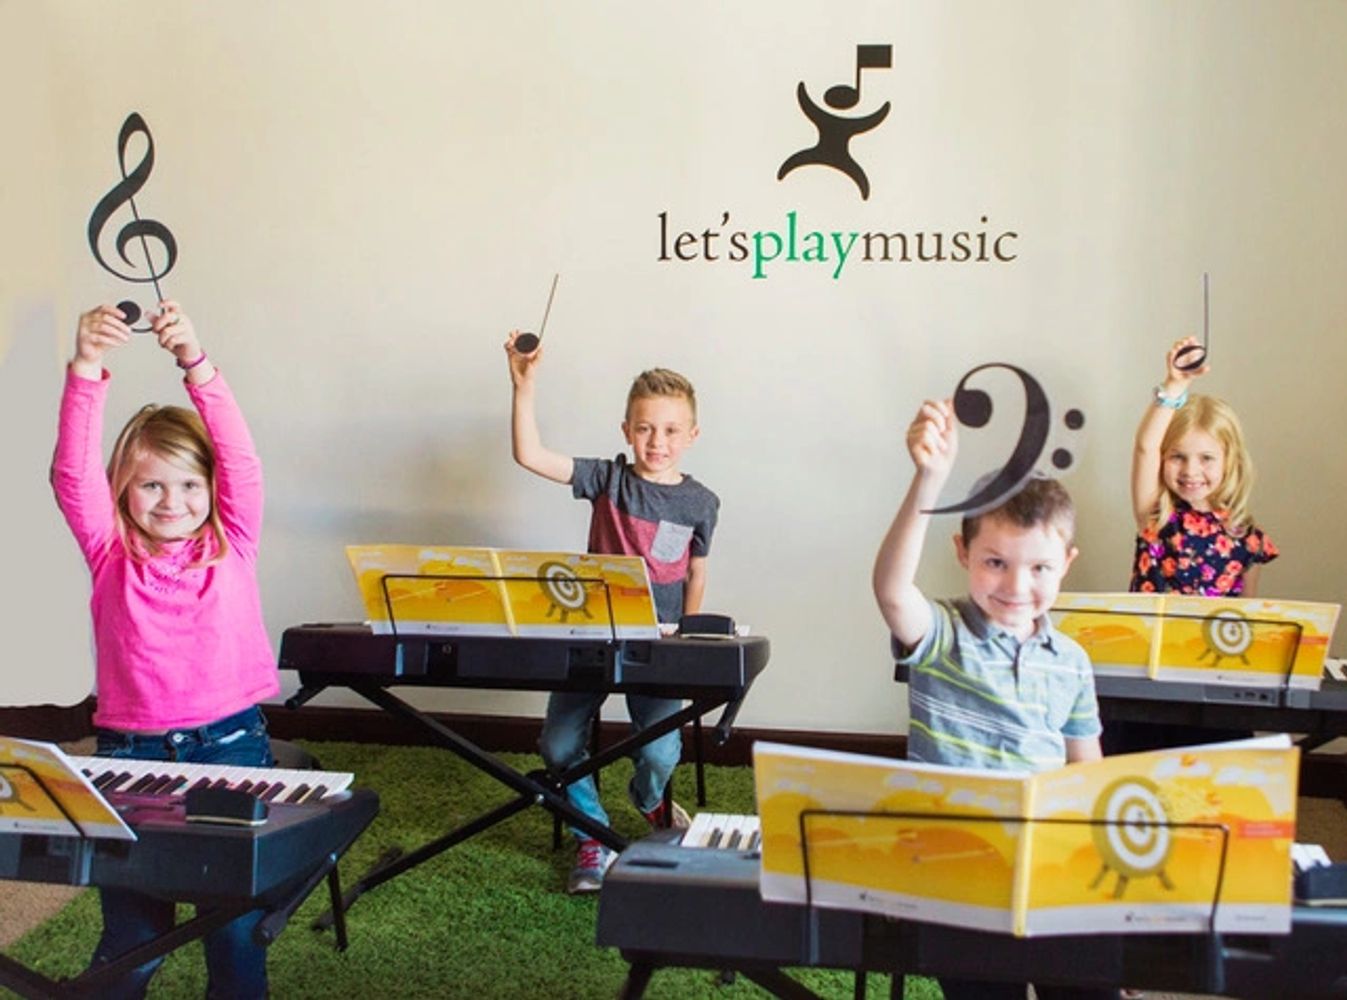 Music Lessons and Piano classes for all ages:
Sound Beginnings:  Age 0-4 yrs
Let's Play Music (Intro